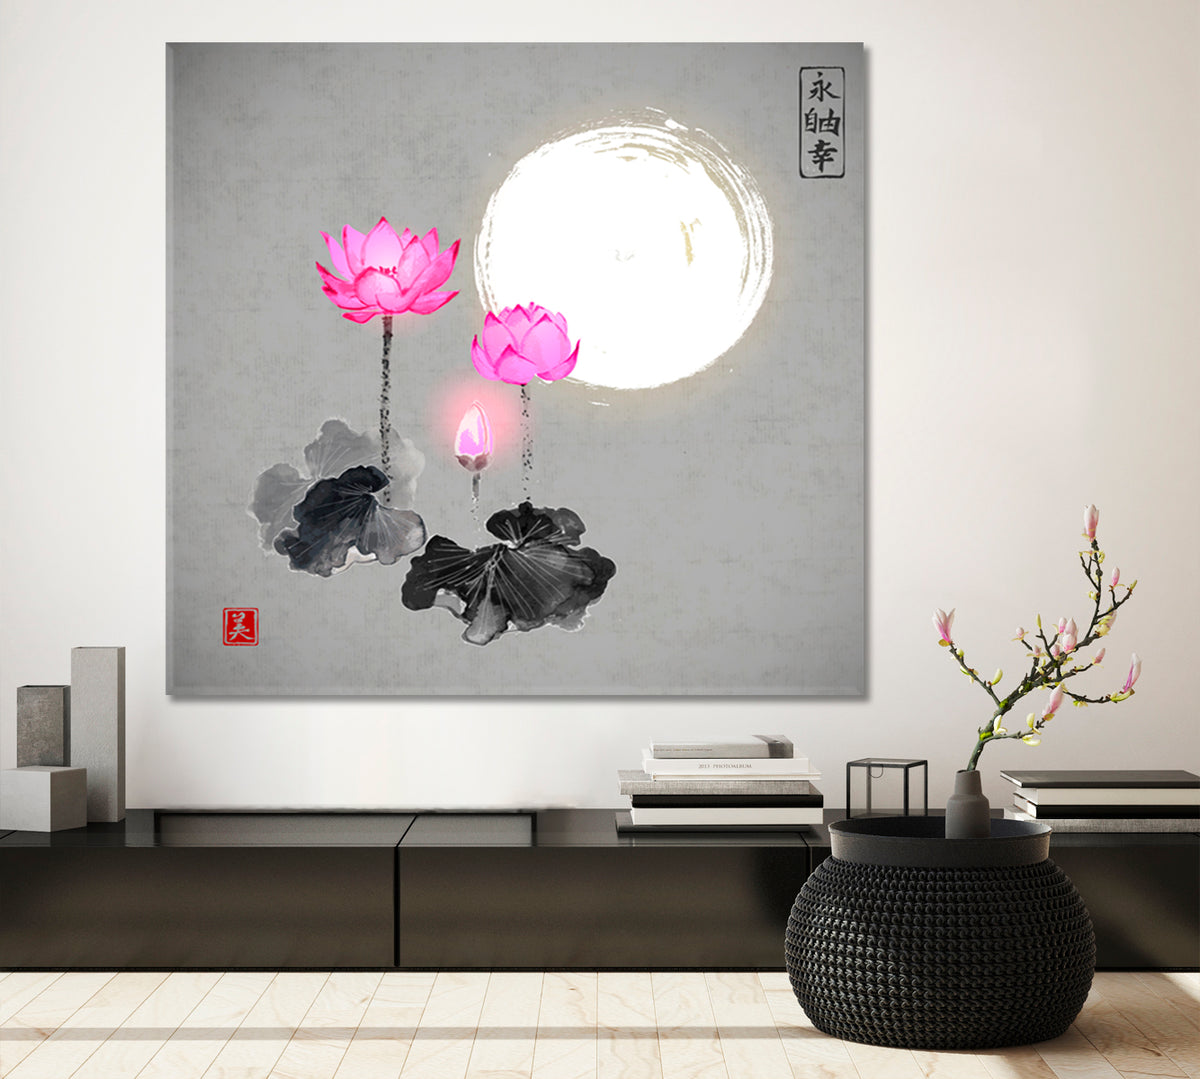 ZEN Pink Lotus Moon Feng Shui Shan Shui Style Japanese Ink | Square Asian Style Canvas Print Wall Art Artesty 1 Panel 12"x12" 